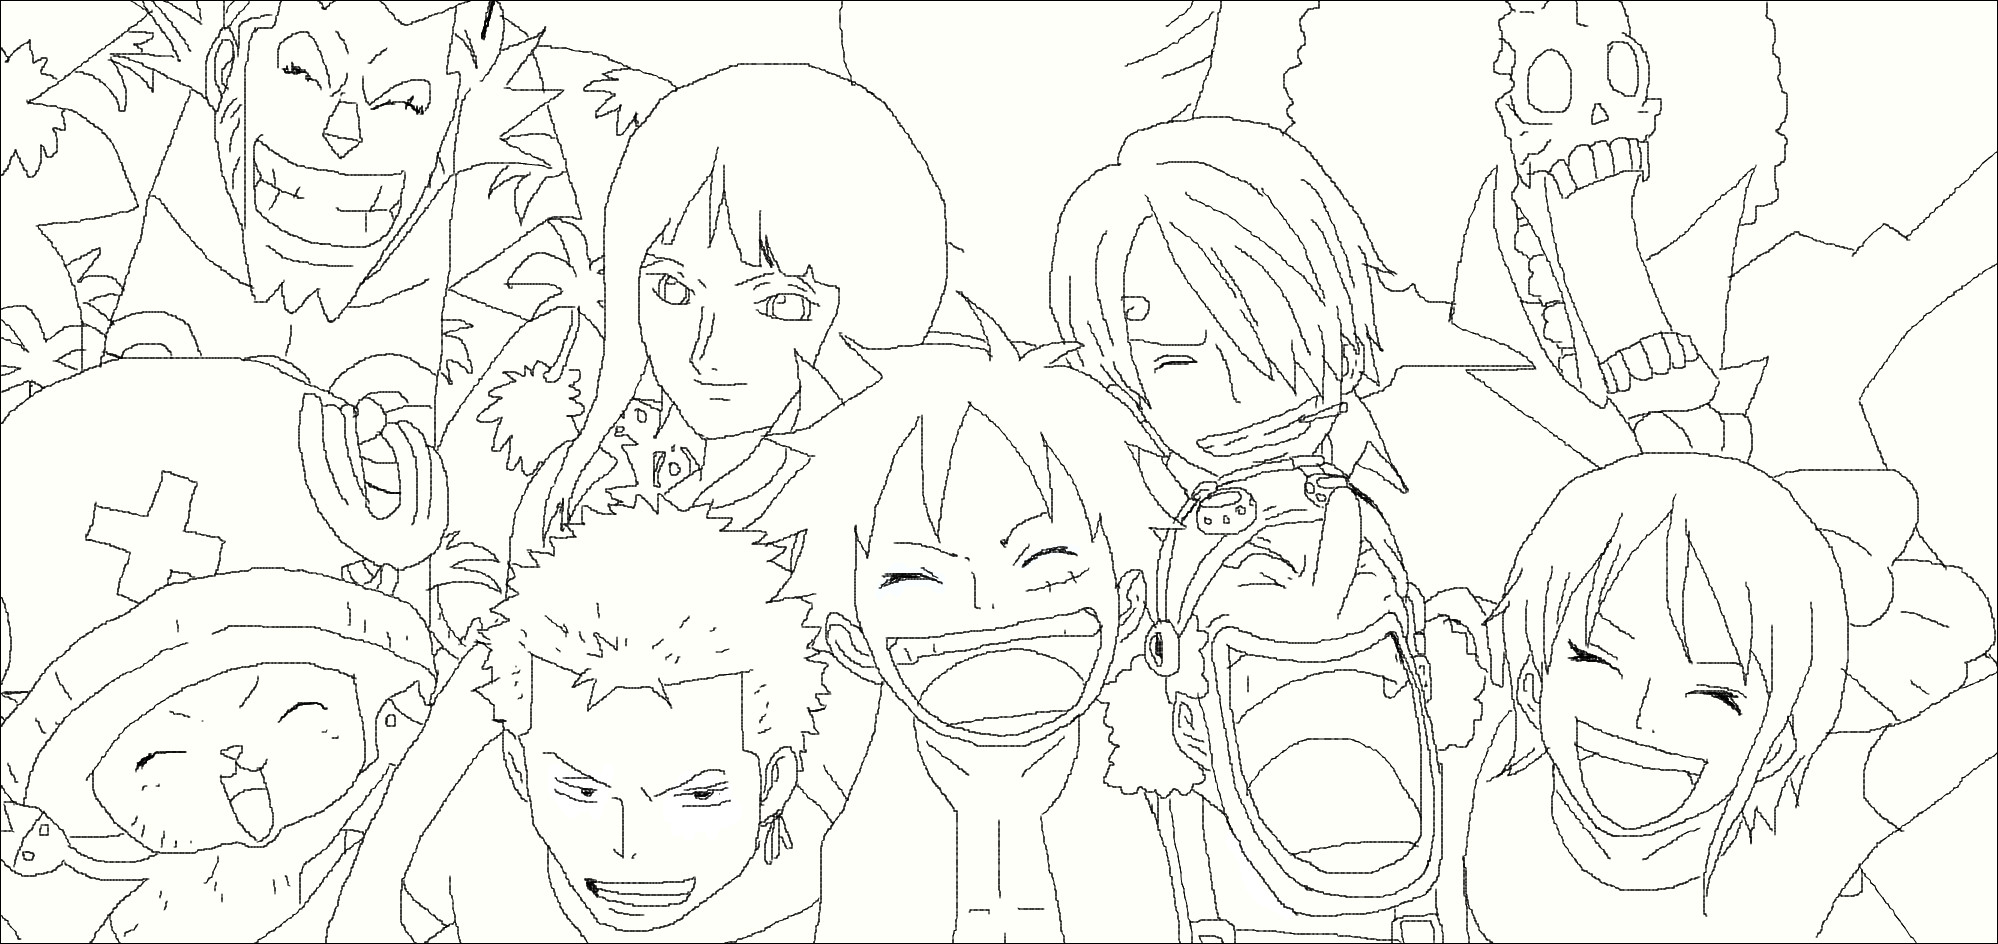 Coloring Pages 48 Fantastic One Piece Coloring Pages One Piece Coloring Pages Printable Fantasy One Piece Coloring Pages Chibi Food Sasuke Coloring Pages And Coloring Pagess Coloring Home